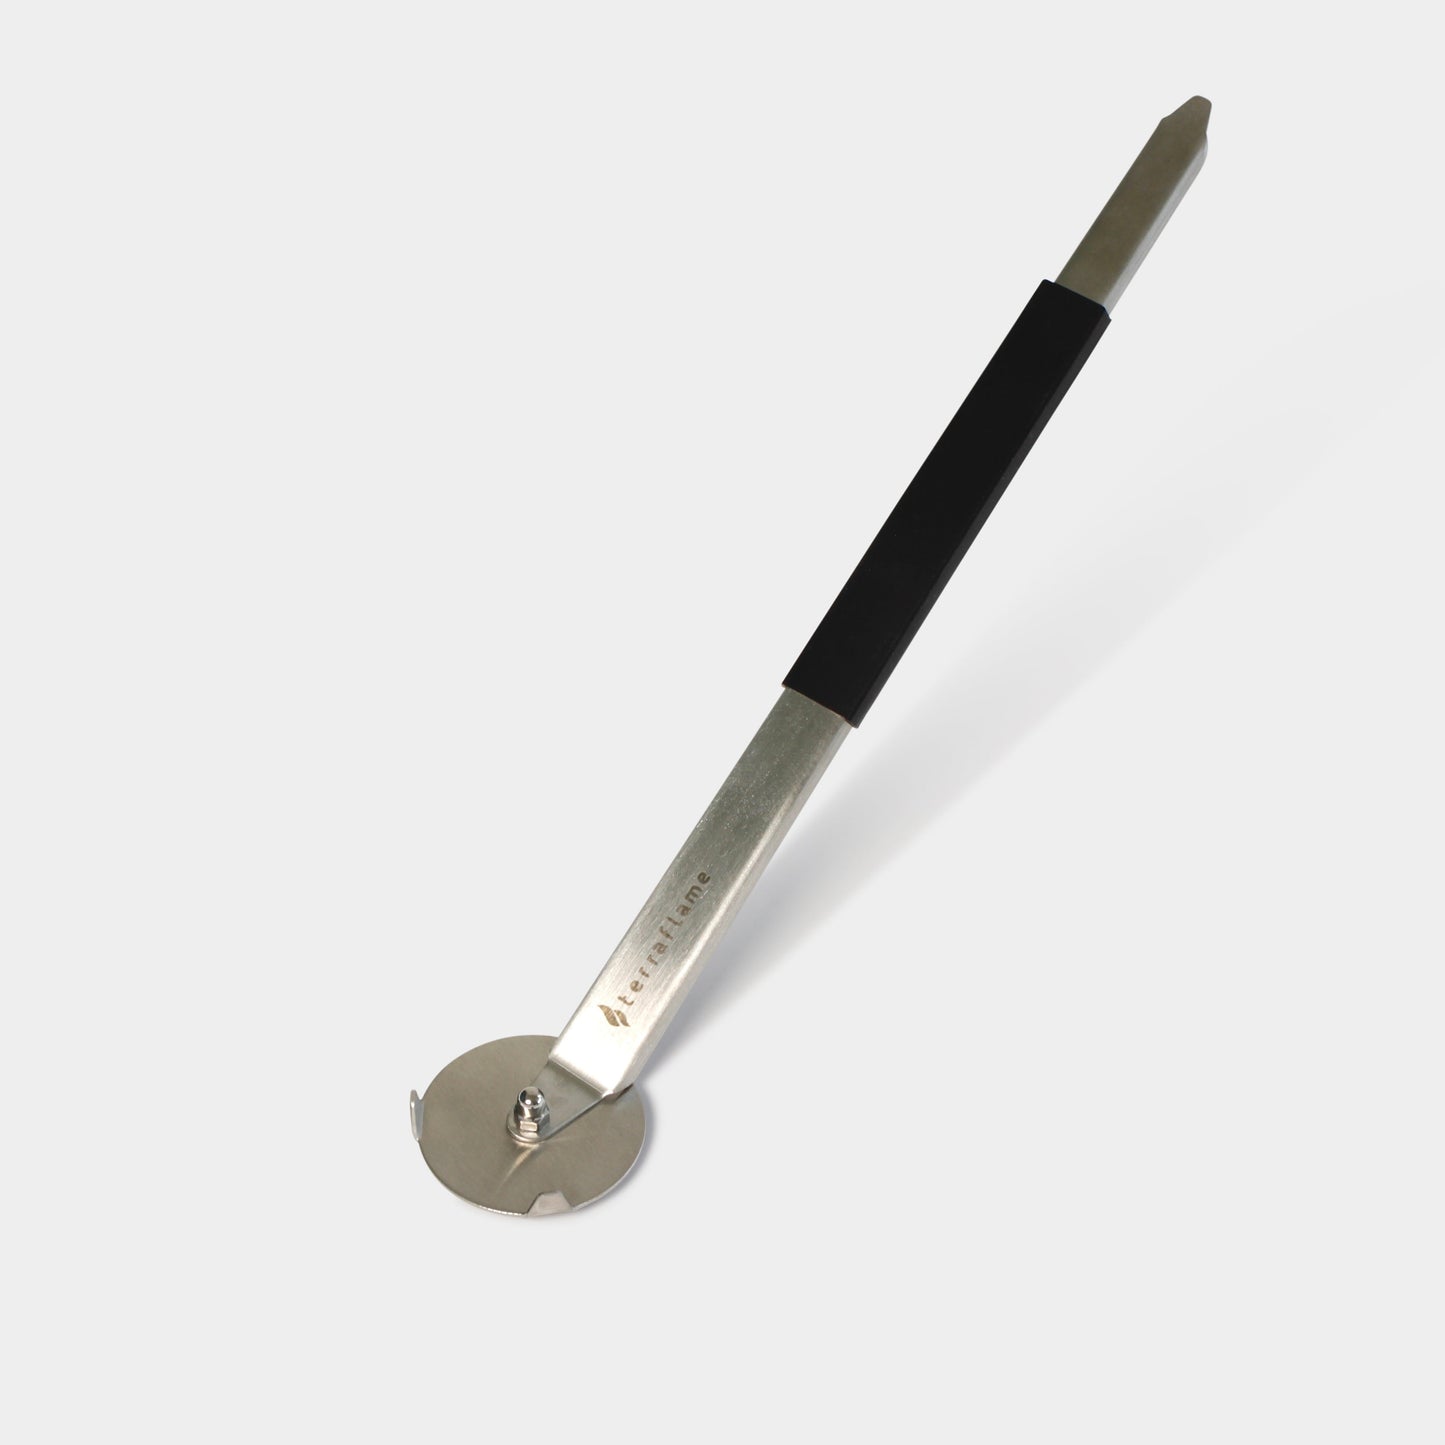 The Snuffer Tool